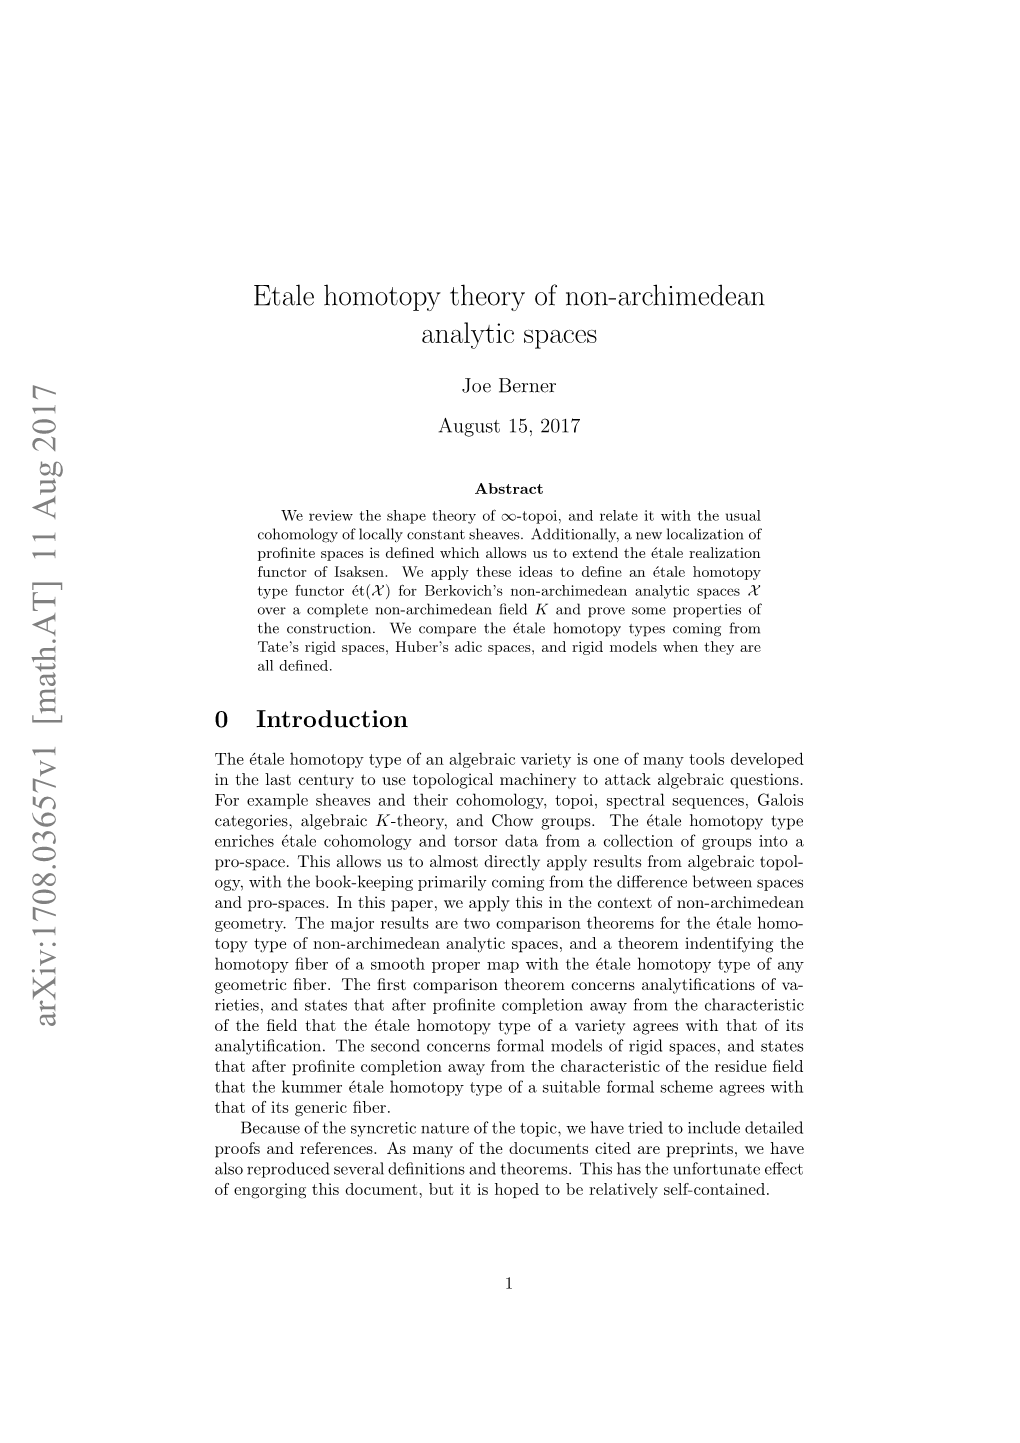 Etale Homotopy Theory of Non-Archimedean Analytic Spaces